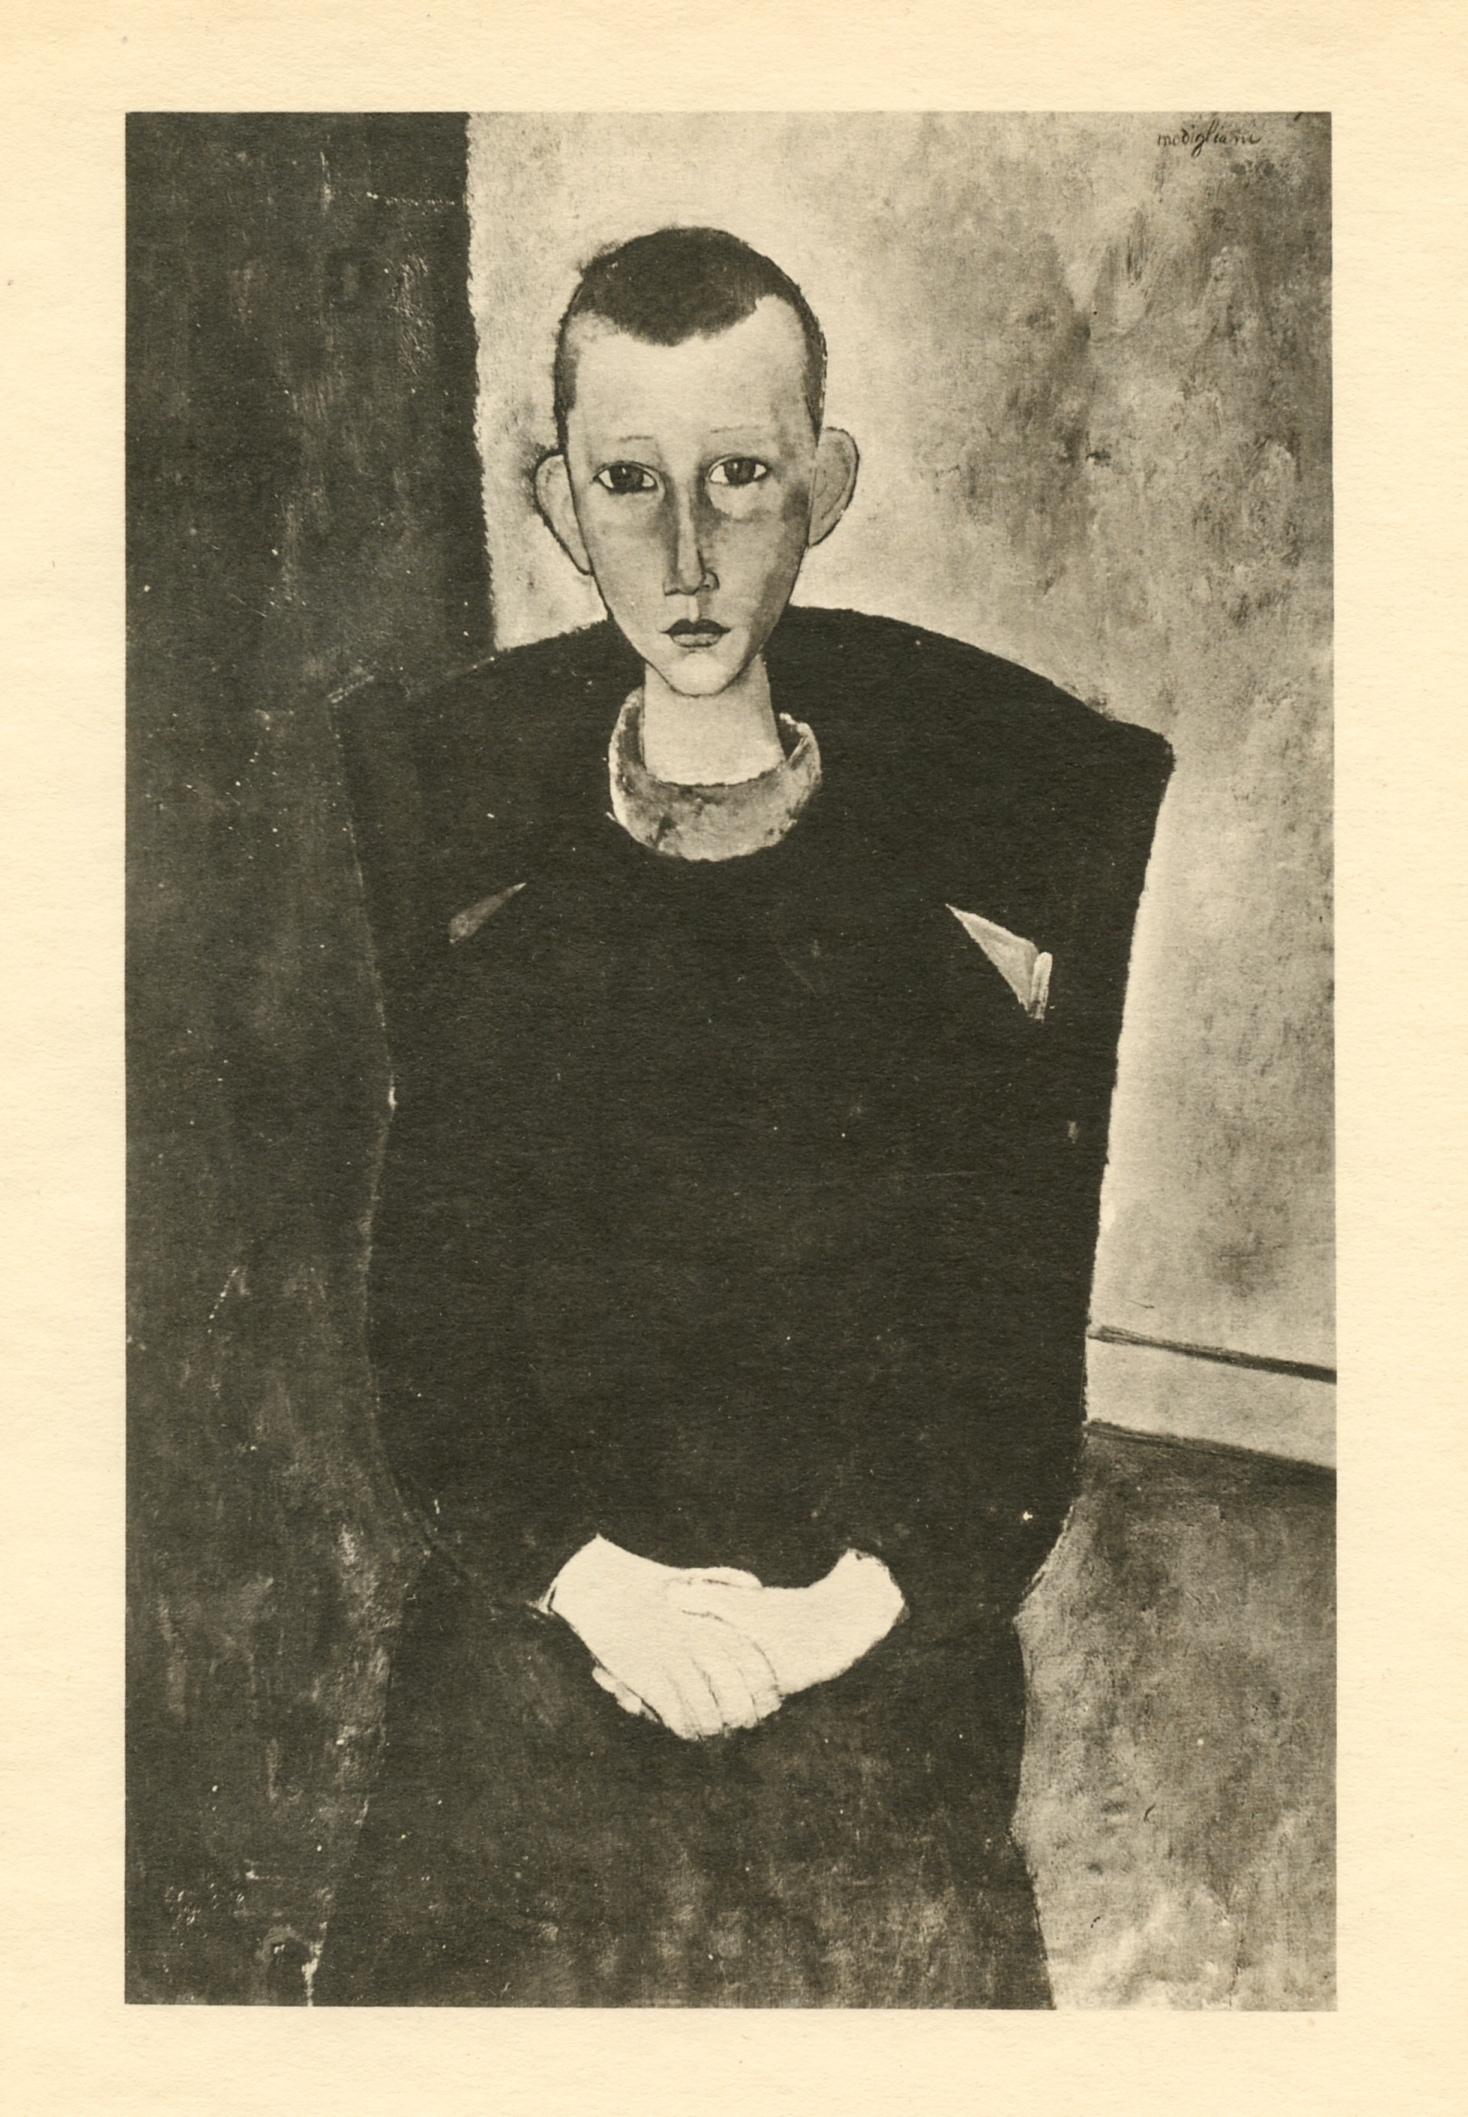 Medium: collotype (after the painting). Printed in 1926 at the Leon Marotte atelier and published in an edition of 1000 by Editions des Quatre Chemins. Image size: 8 x 5 inches (200 x 128 mm). Sheet size: 11 x 8 1/4 inches (280 x 210 mm). Signed in